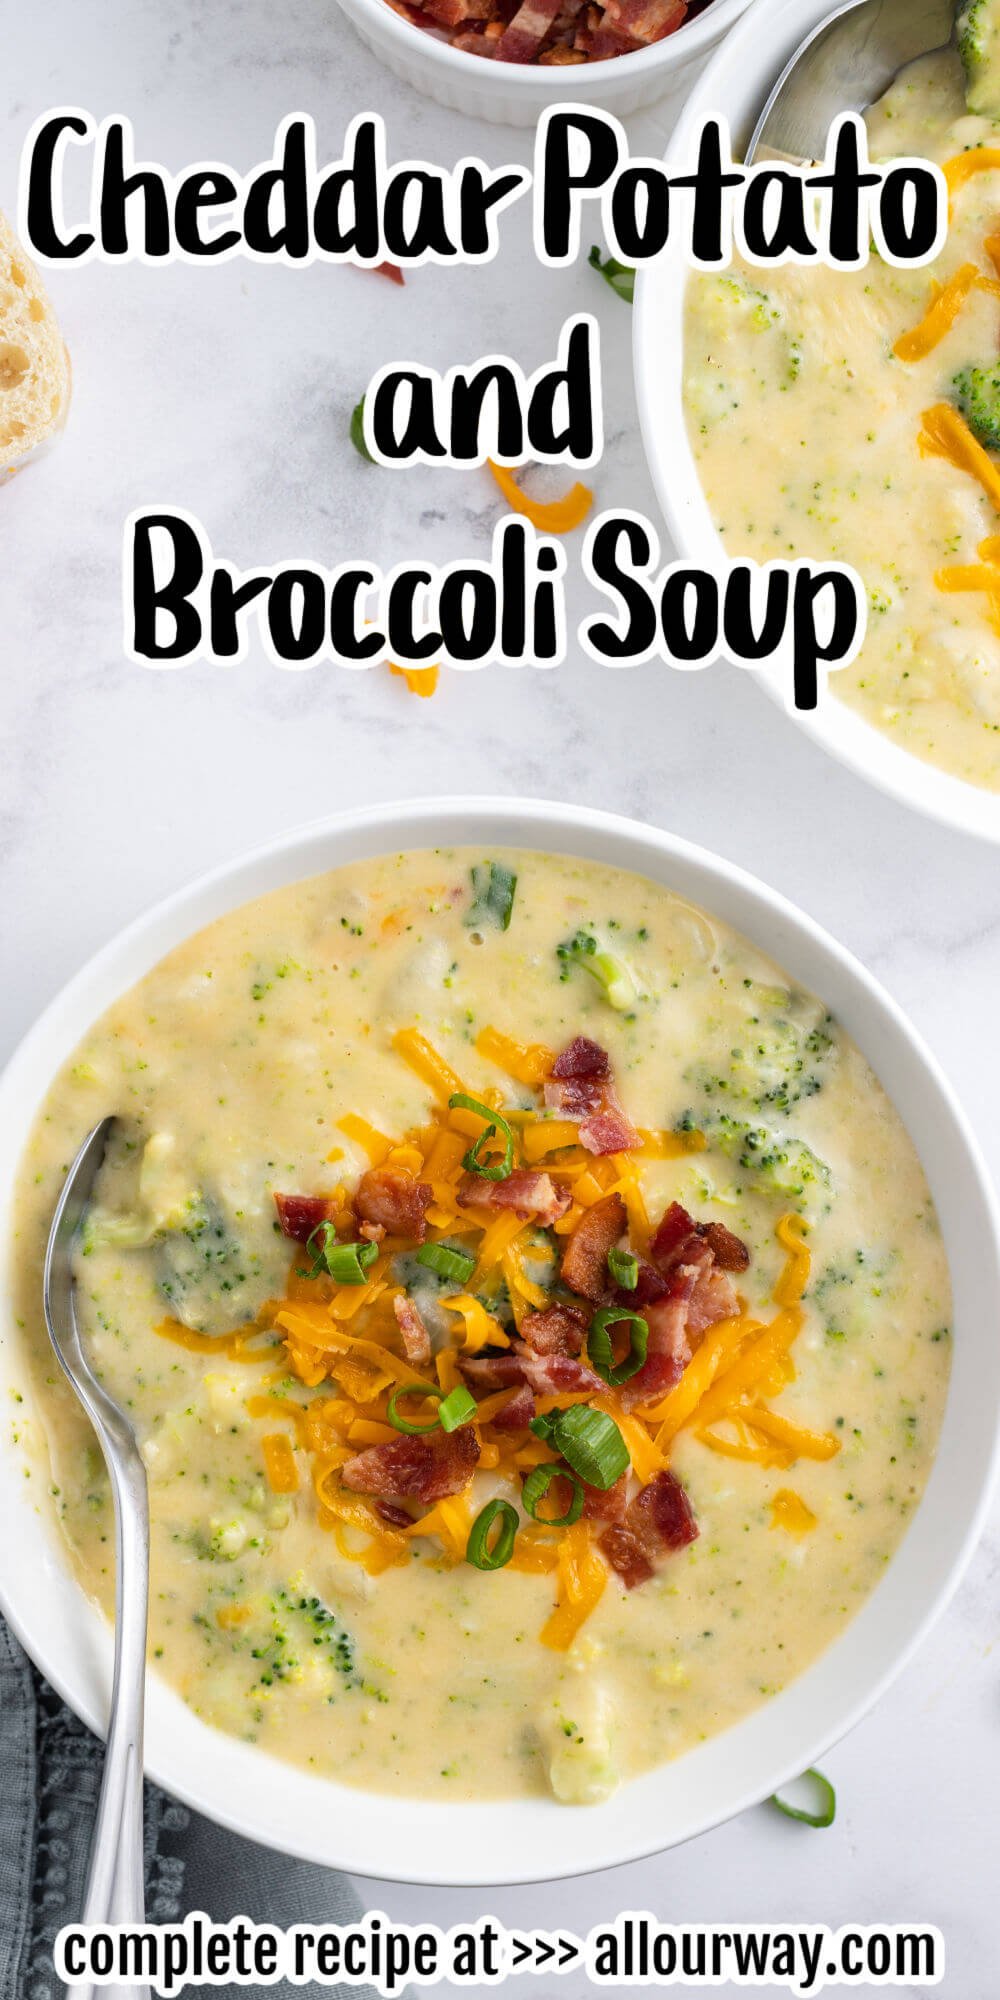 This Cheddar Potato Broccoli Soup recipe makes a rich and comforting soup with tender pieces of broccoli and potato, and melted cheddar cheese infused throughout! It's hearty and rich without heavy cream. Serve it this fall or winter with garlic bread or grilled cheese sandwiches.